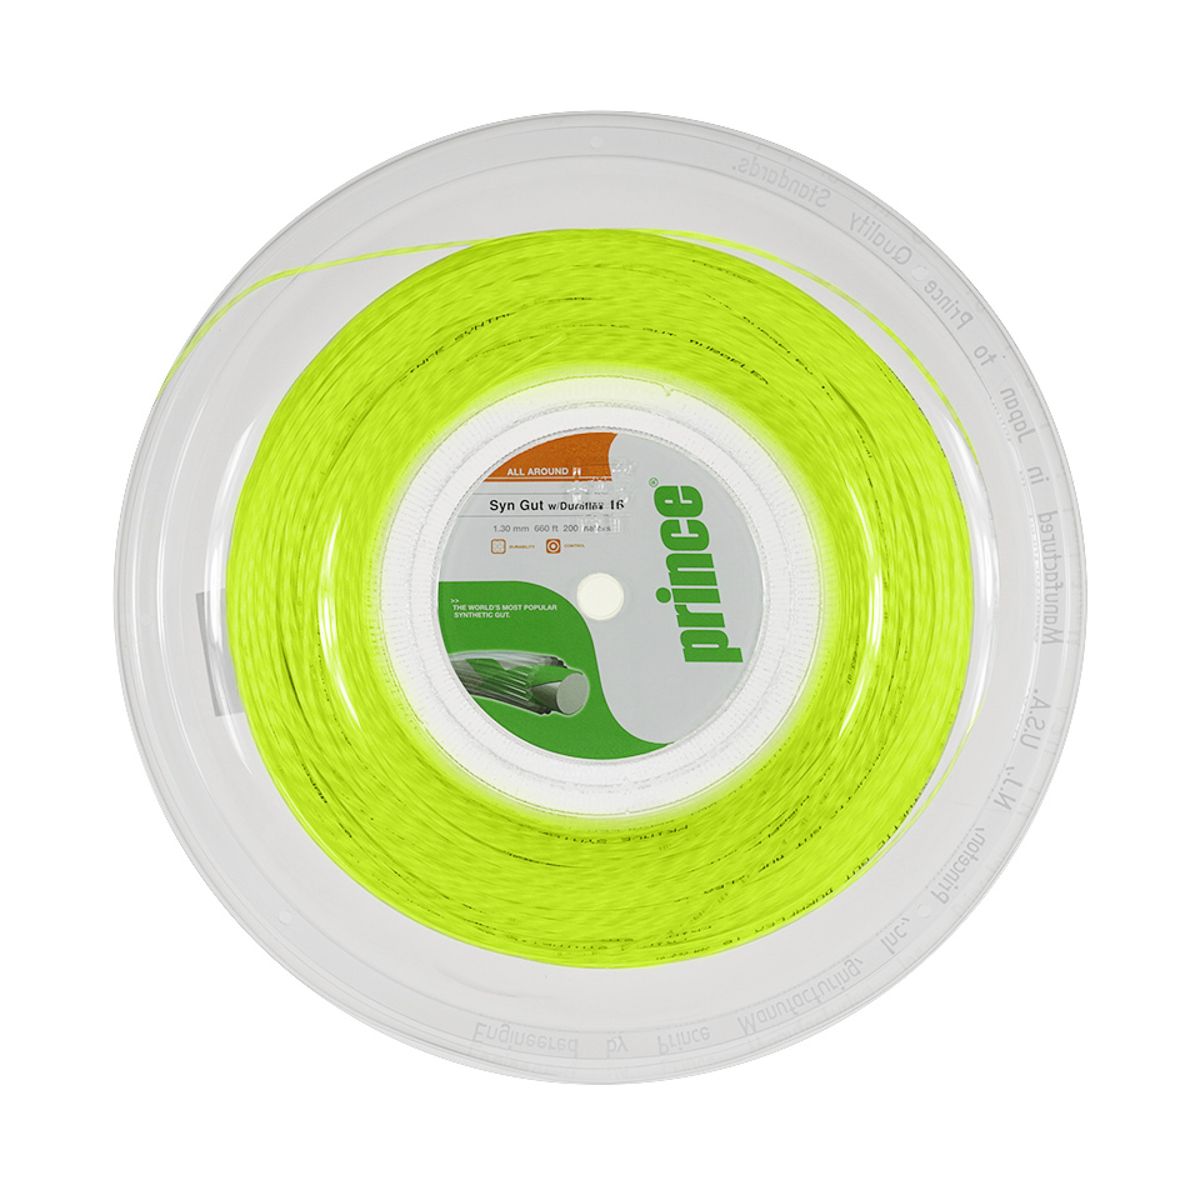 Prince Synthetic Gut With Duraflex 17g White Tennis String M69a for sale online 